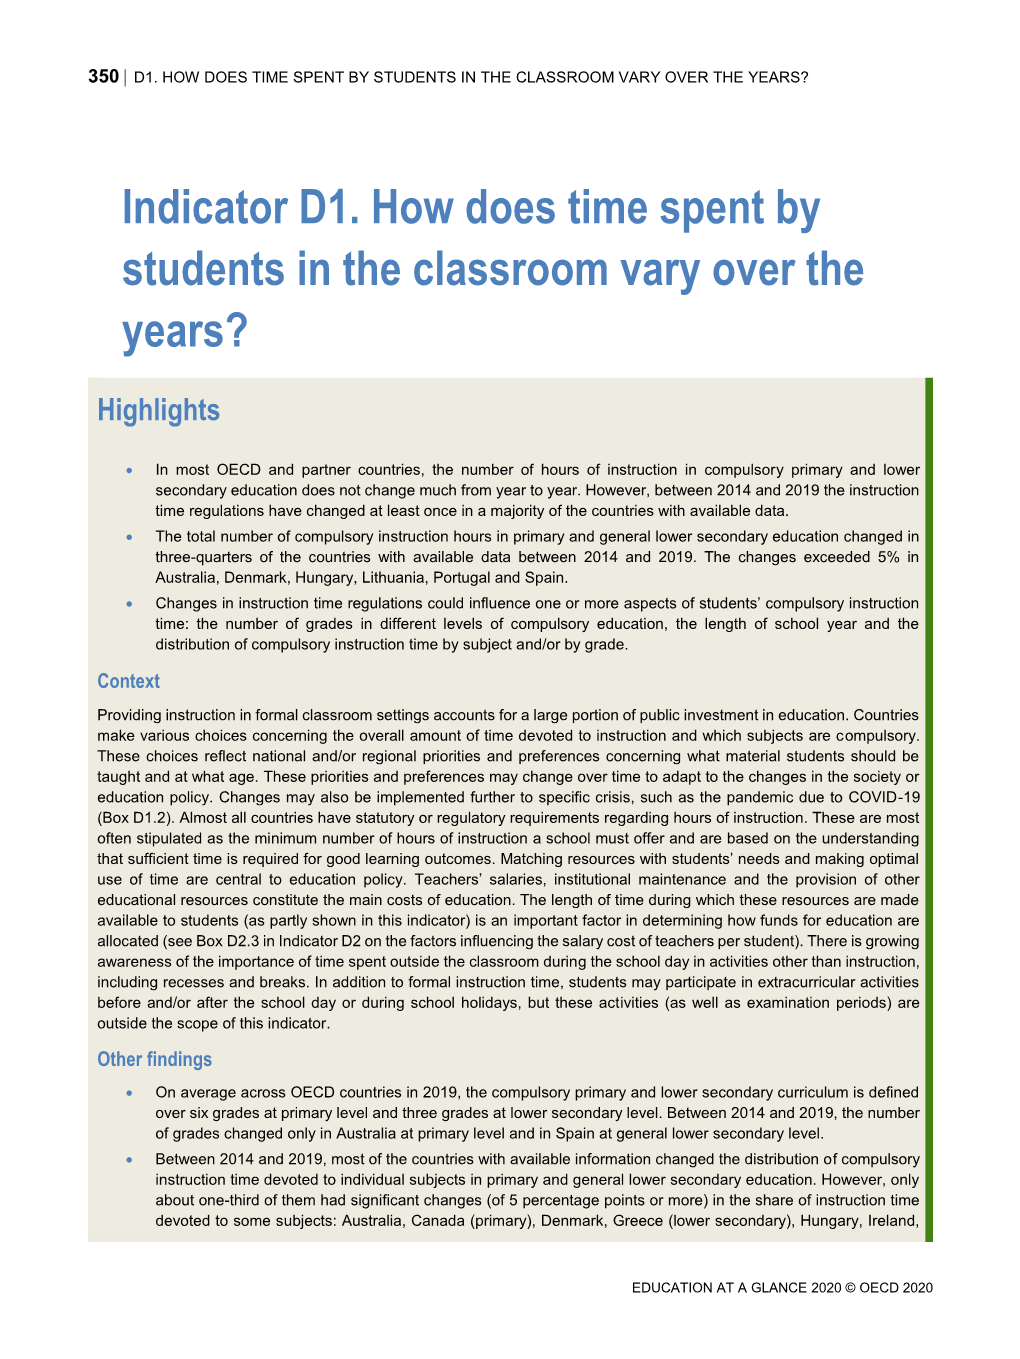 Indicator D1. How Does Time Spent by Students in the Classroom Vary Over the Years?